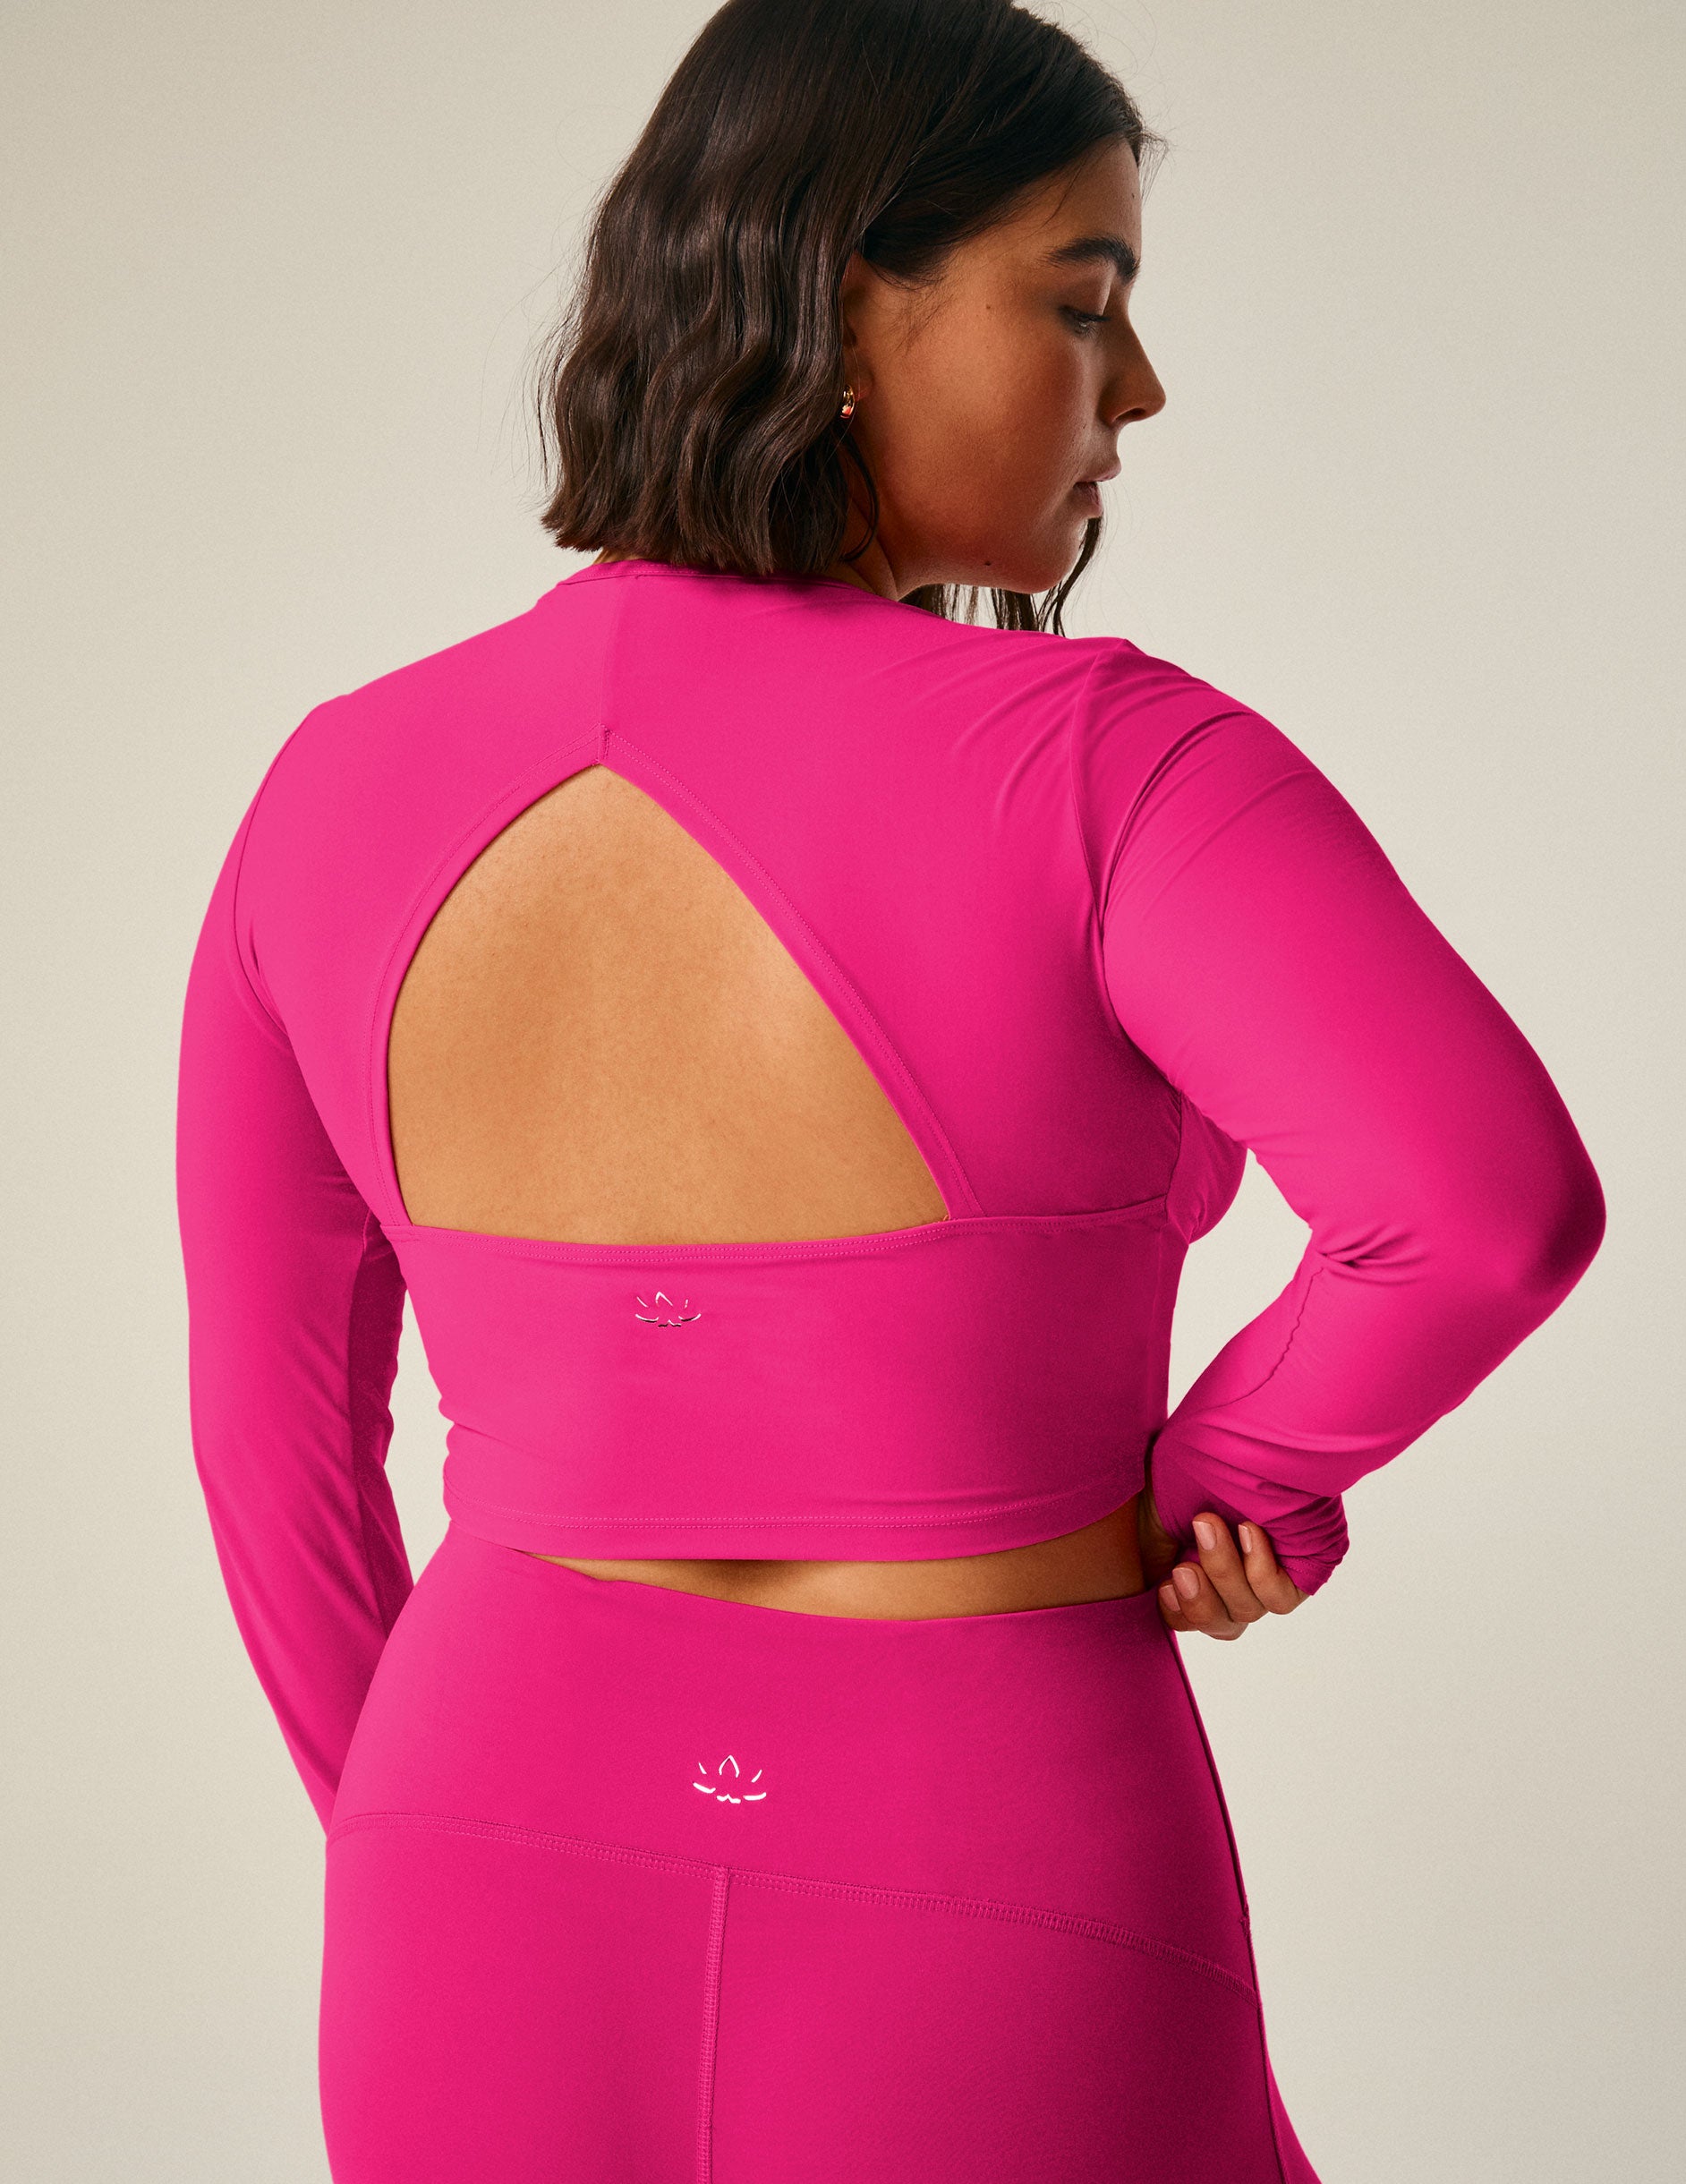 pink long sleeve cropped top with an open back detail.